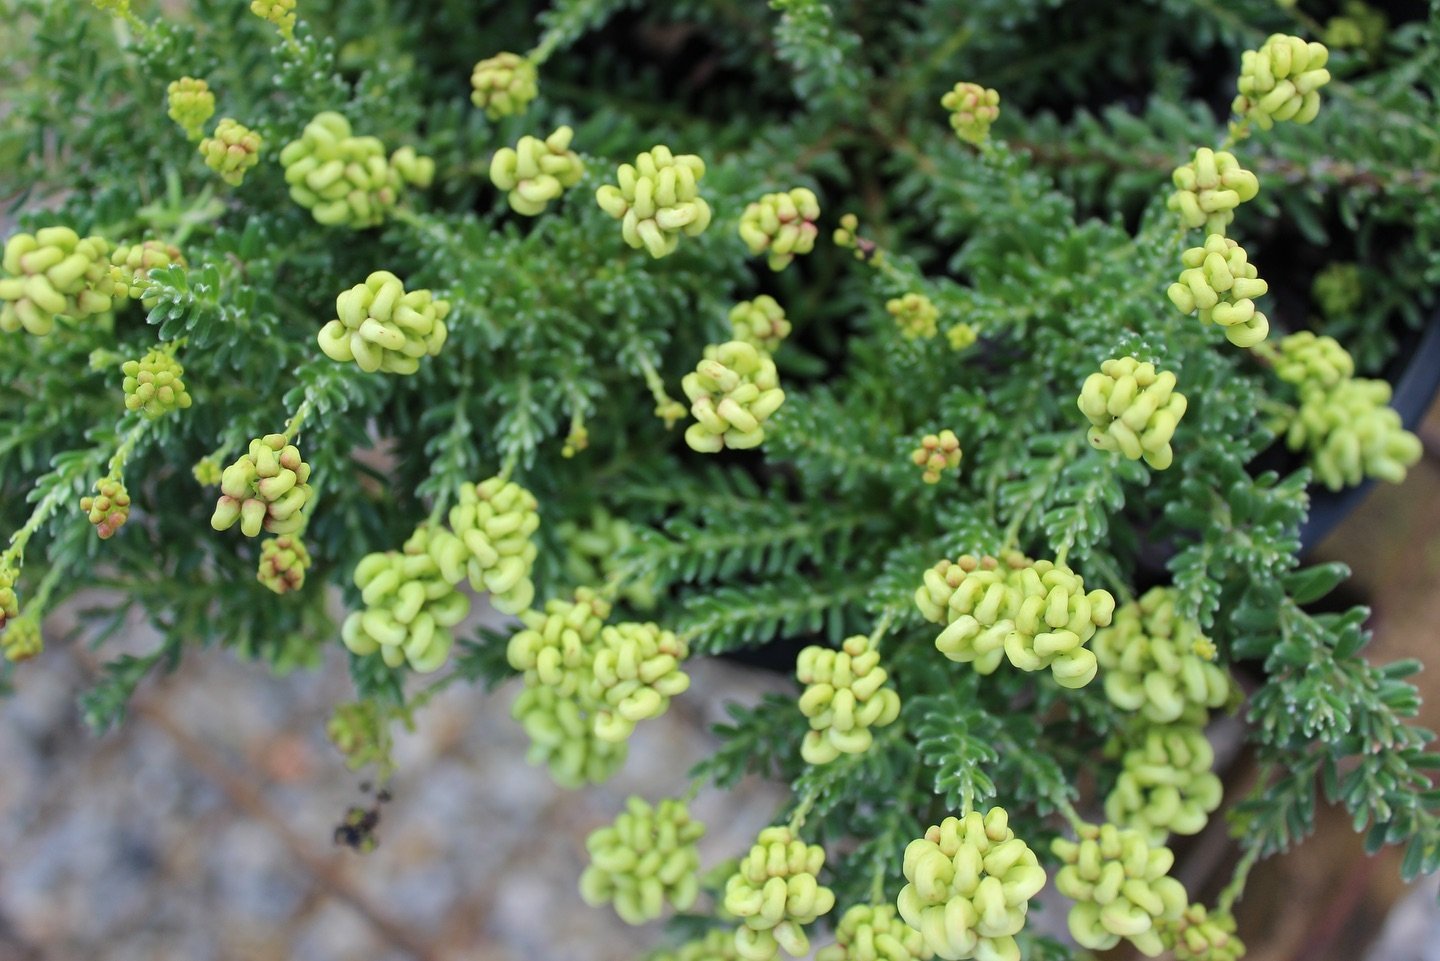 What a STUNNER!!! 

Grevillea lanigera - Mello Yellow 
 
🌱 Winter flowers 
🌱  Grey Green foliage 
🌱 Bright yellow flowers with a pinkish tinge during the cooler months 
🌱 tough - withstand dry conditions 
🌱 30 cm tall x 1m wide
🌱 Frost tolerant